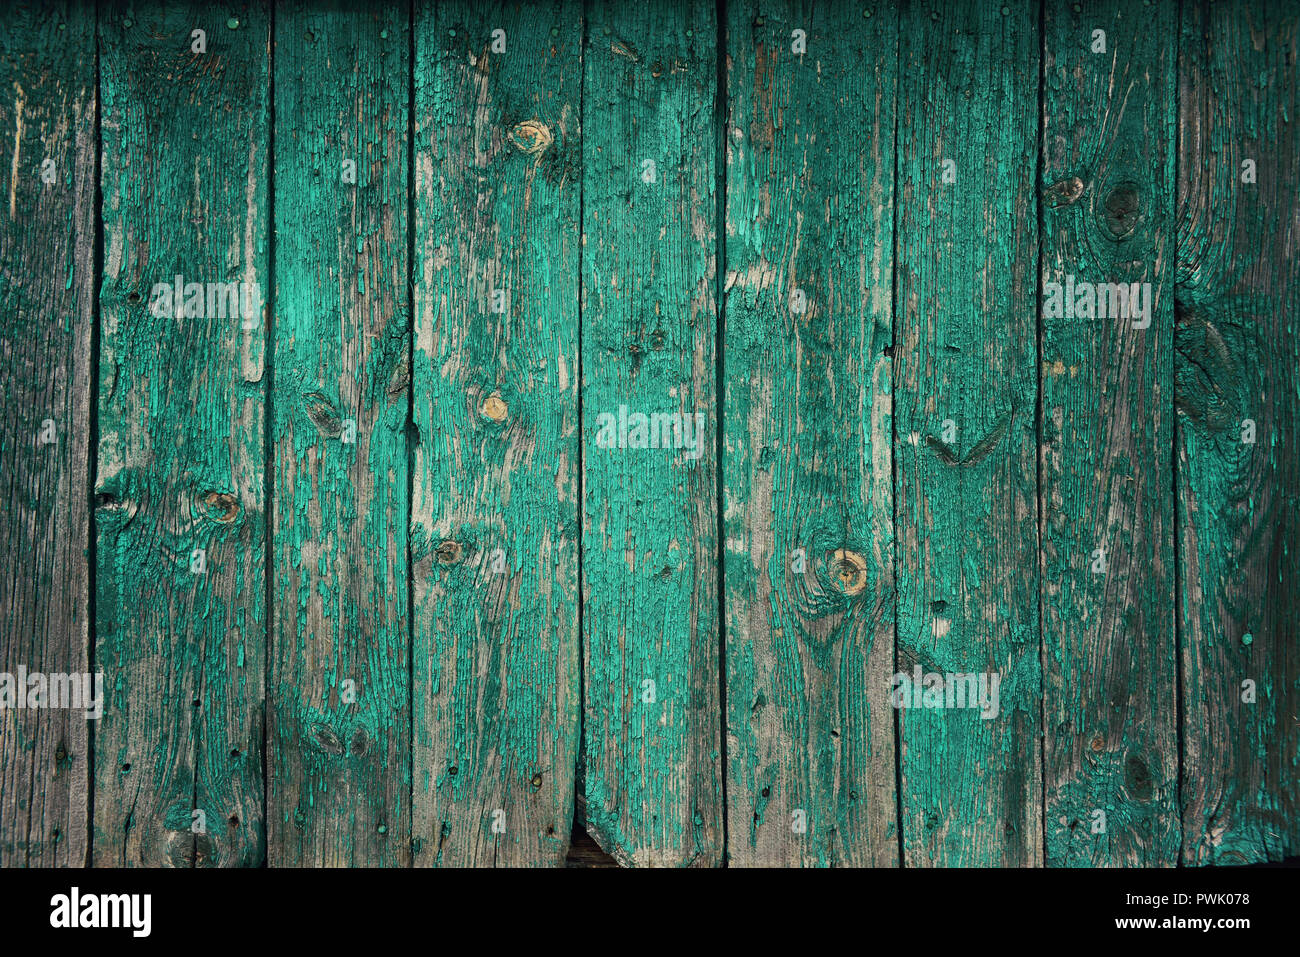 Green wooden background Stock Photo